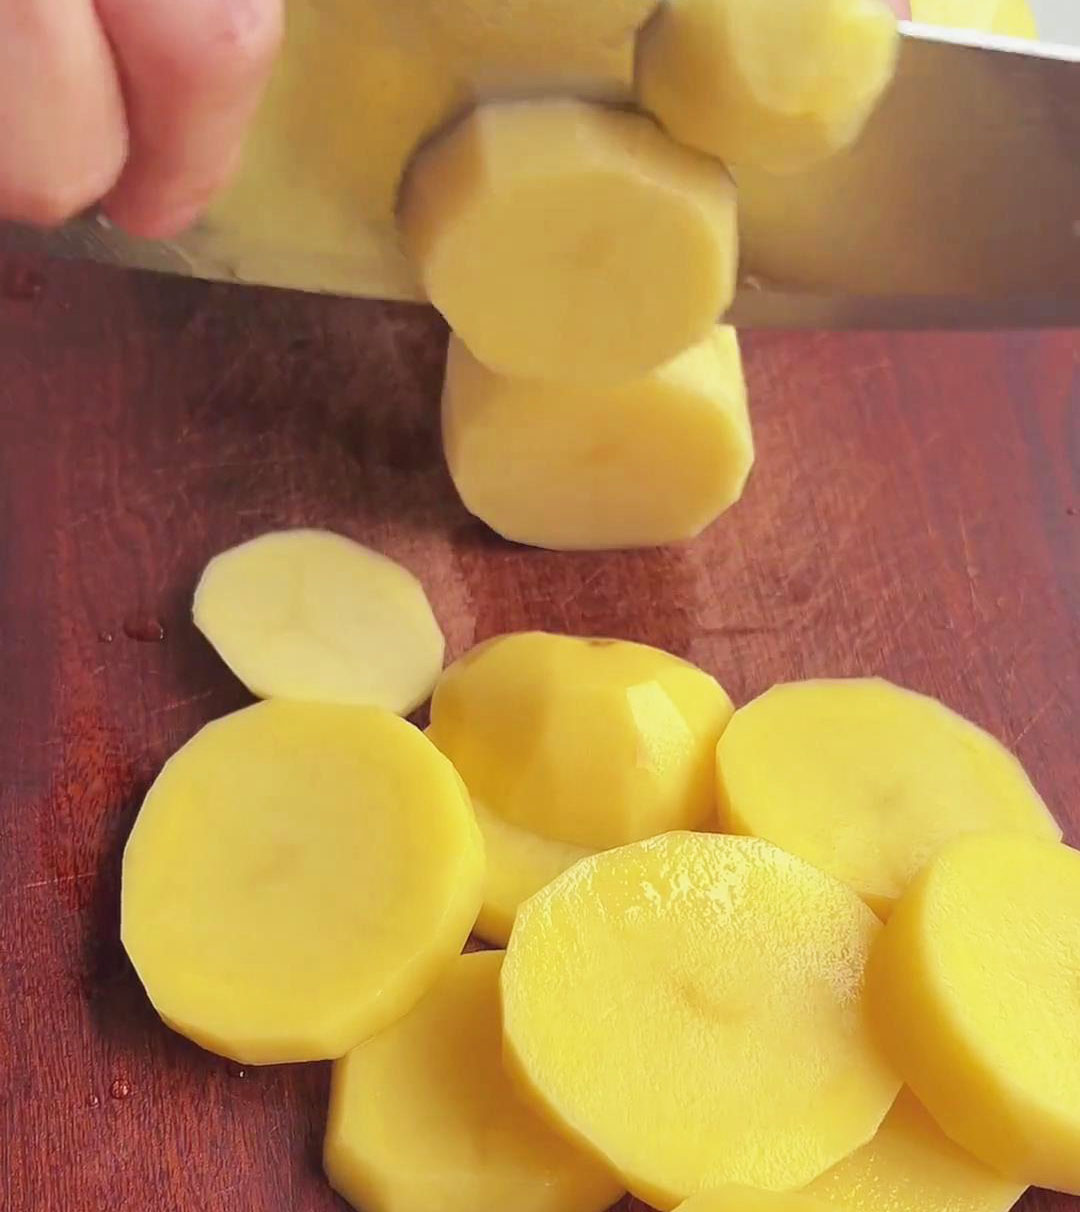 Peel and cut the potatoes into thin slices